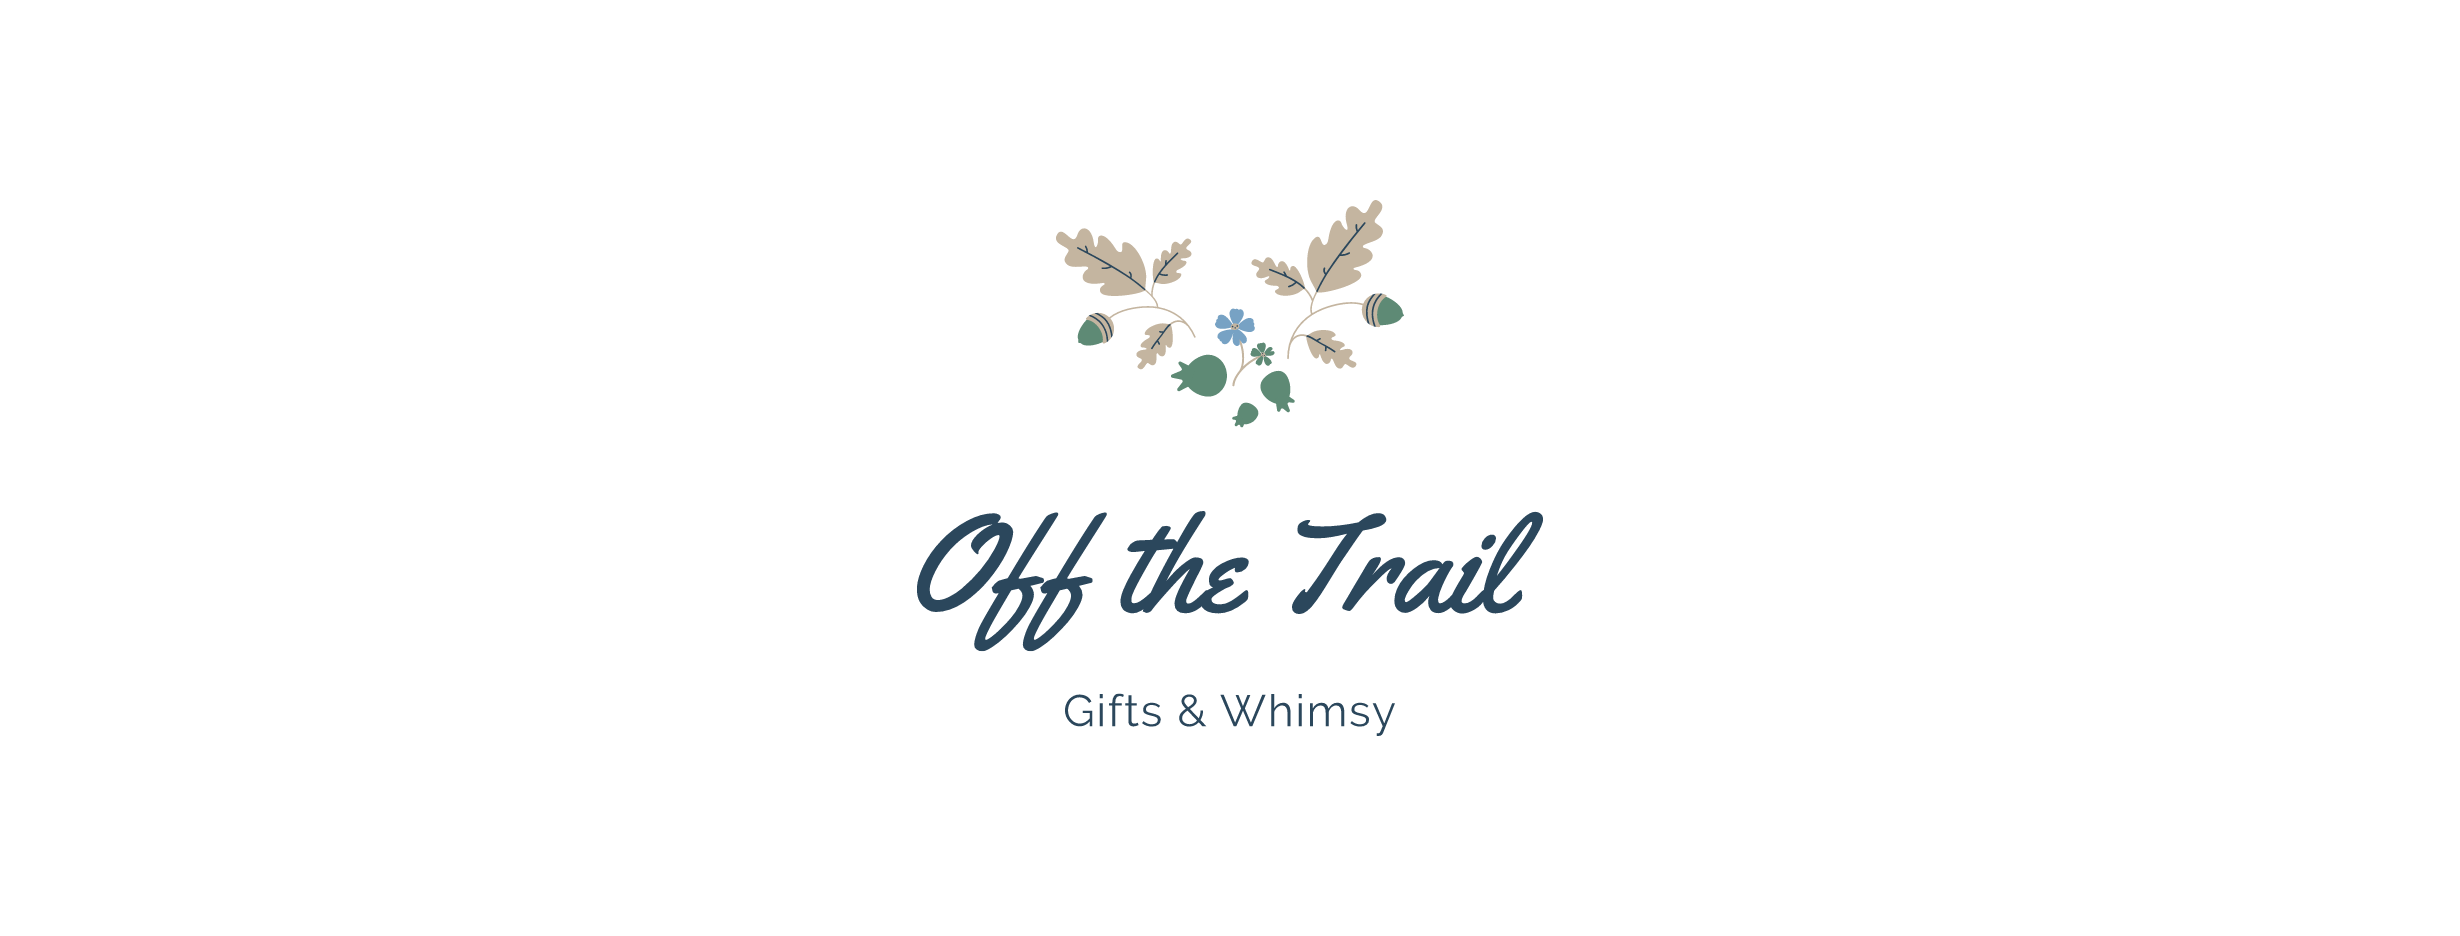 Off The Trail Gifts